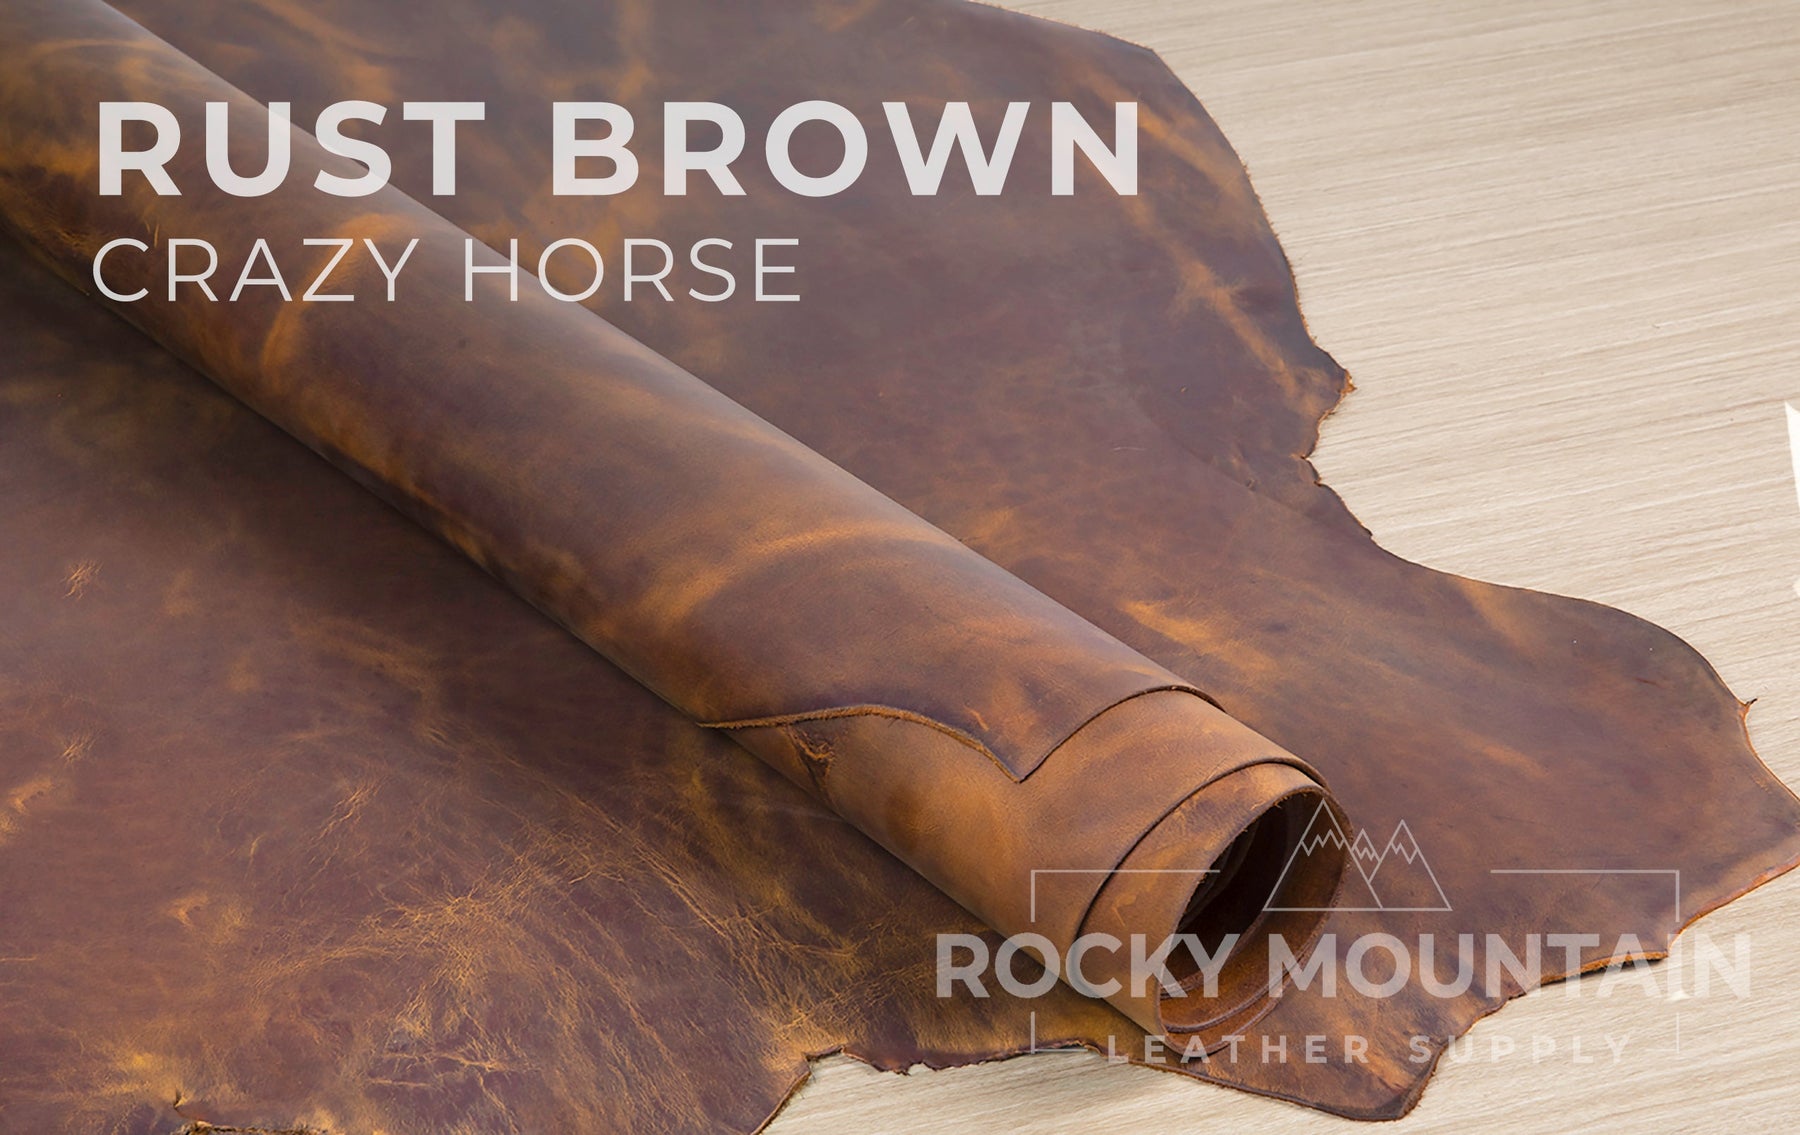 Crazy Horse 🇺🇸 - Rustic Pull up Leather - Made in USA (SAMPLES)